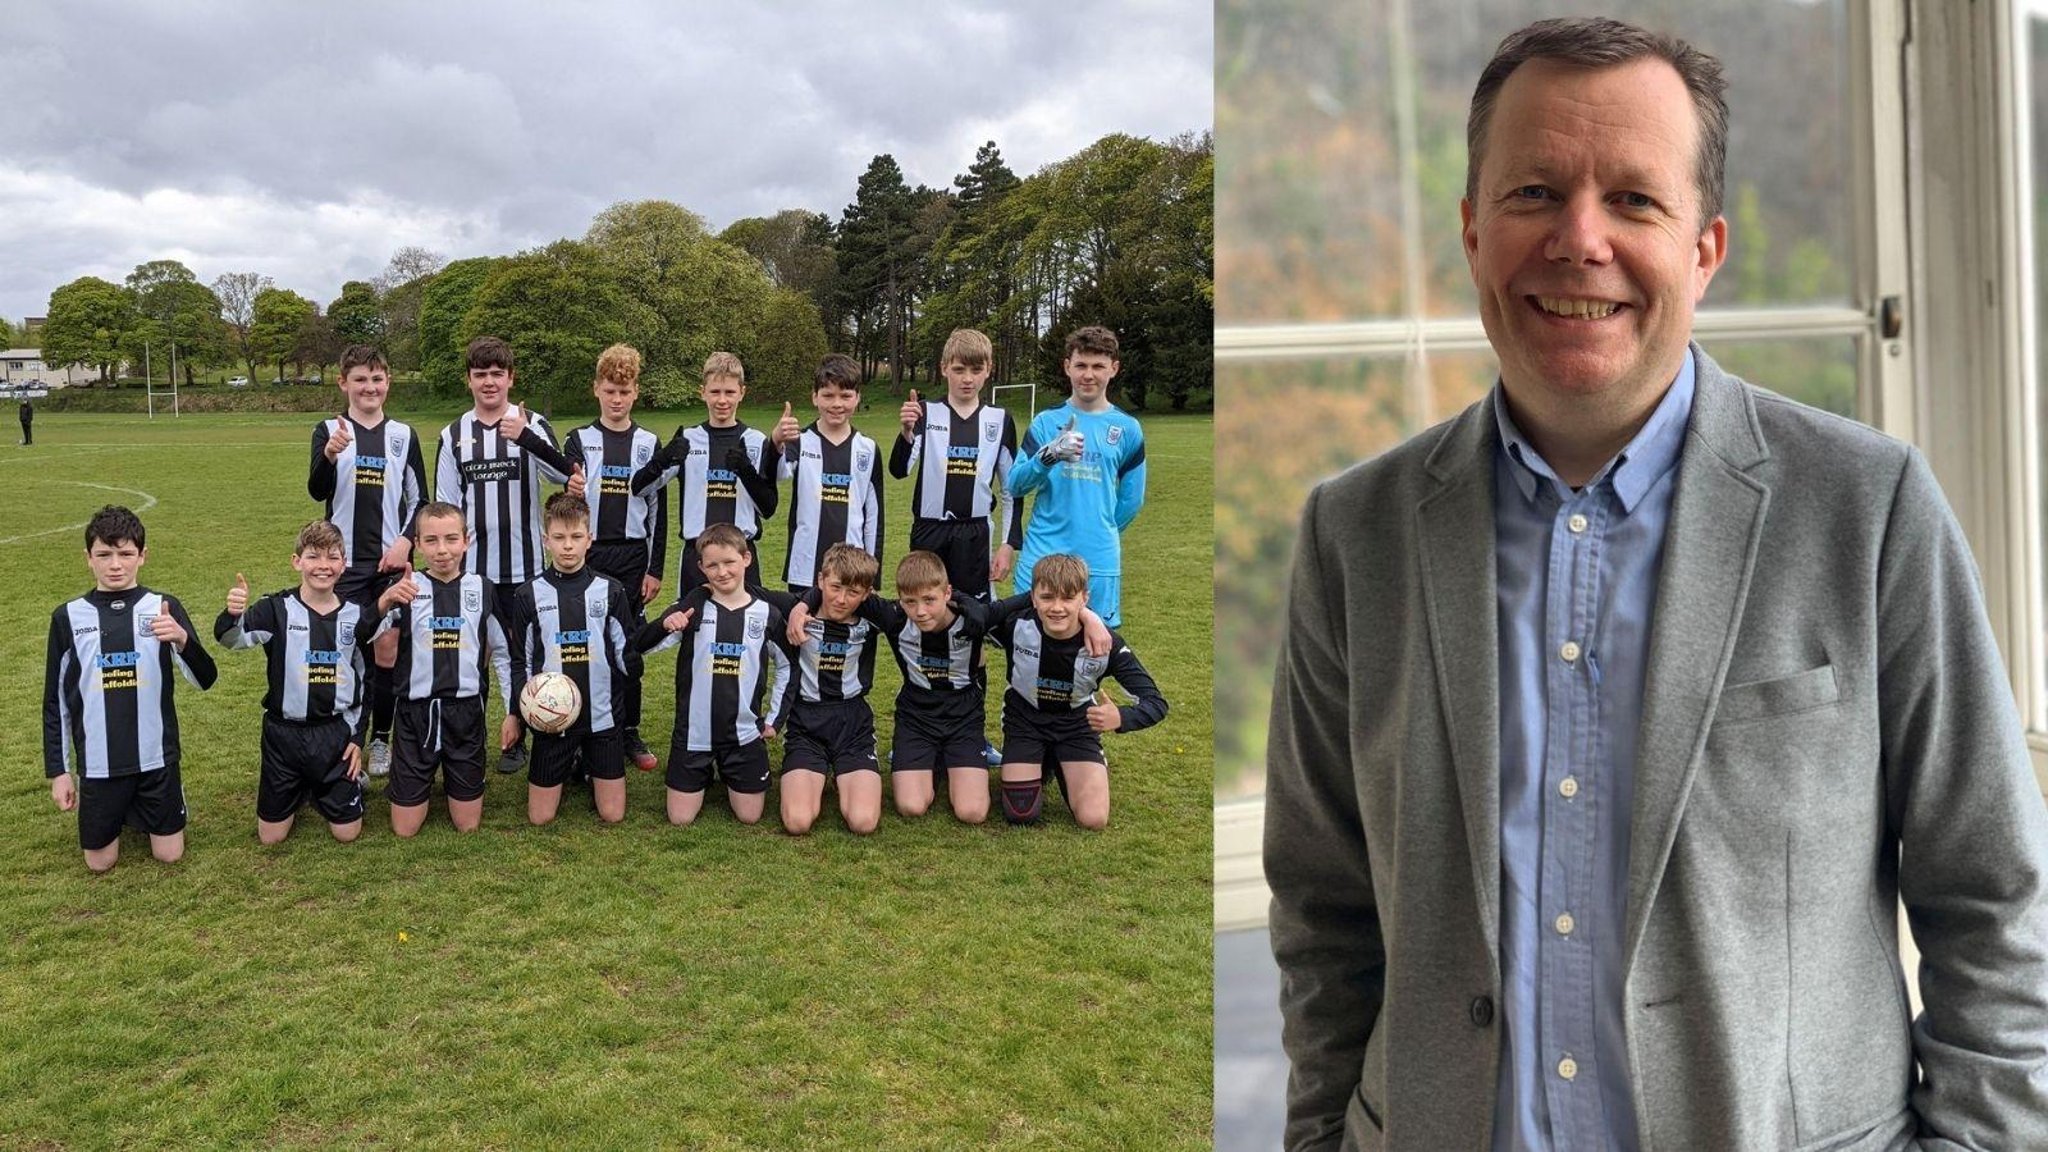 National clinical director shows support for children's athletic team in Leith raising funds for a new kit